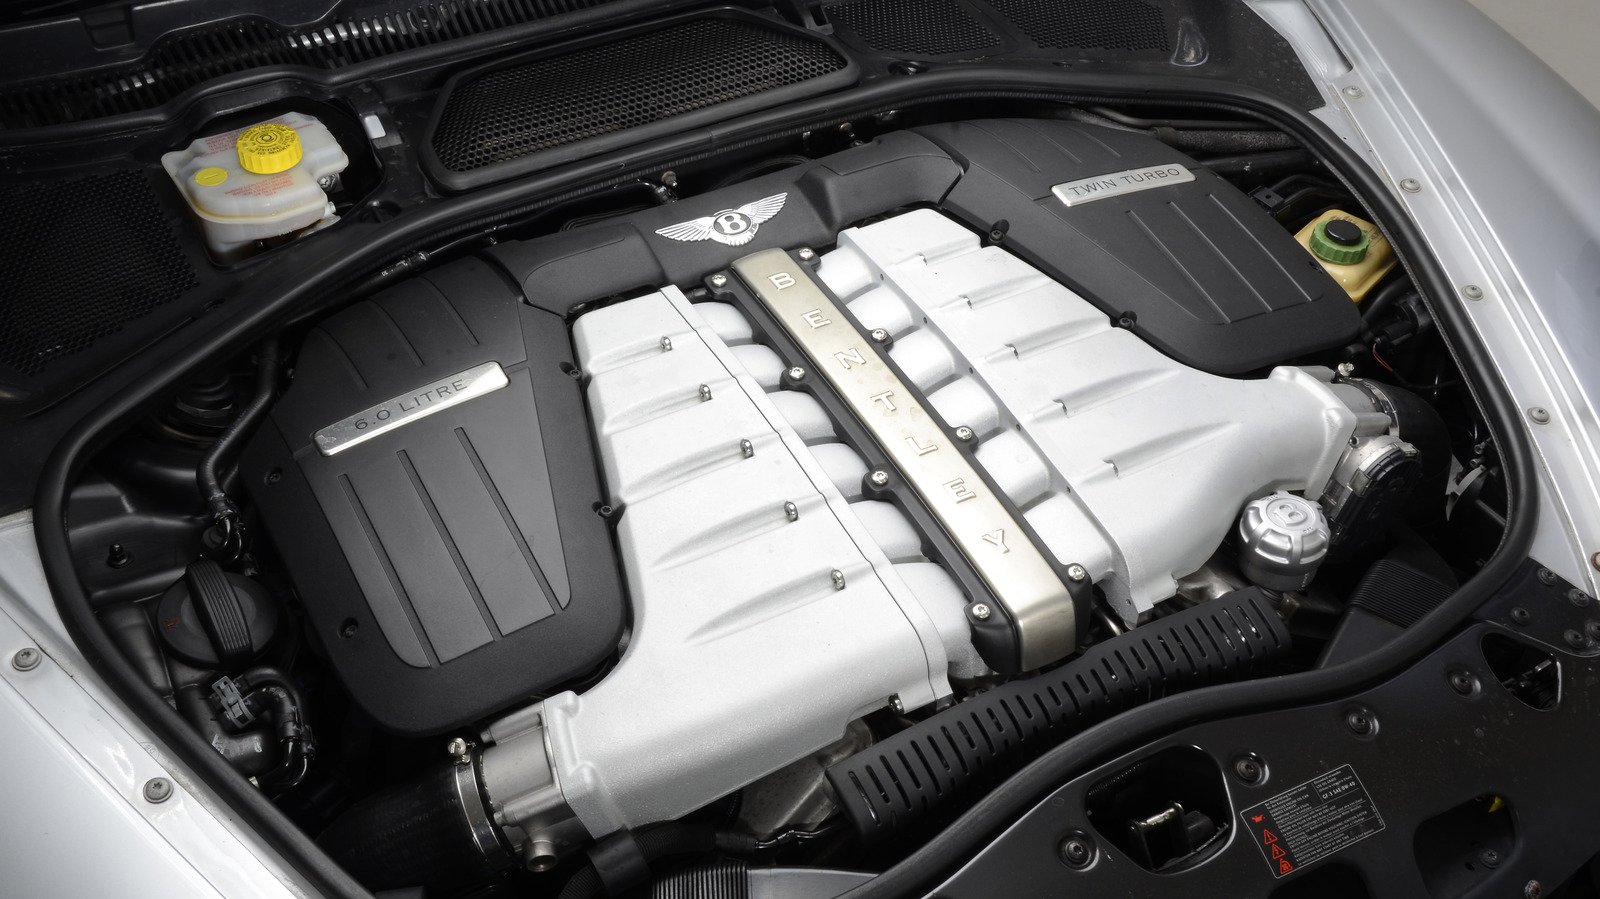 Bentley To End Production Of The Iconic 12-Cylinder Engine After 20 Years